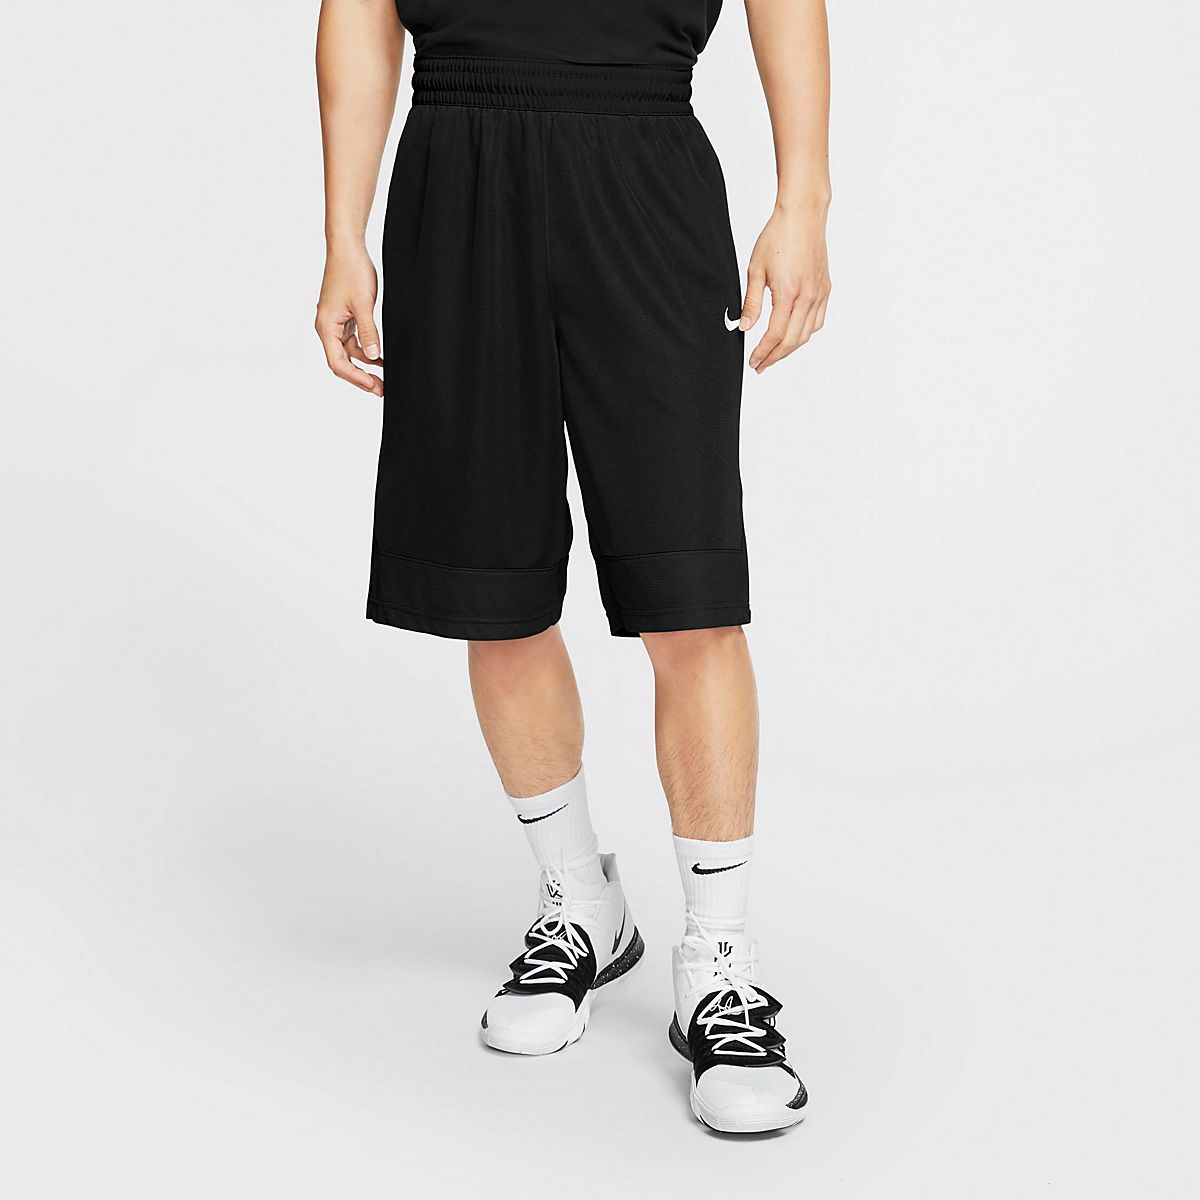 Nike Basketball Dri-Fit Icon Shorts in Navy and Red